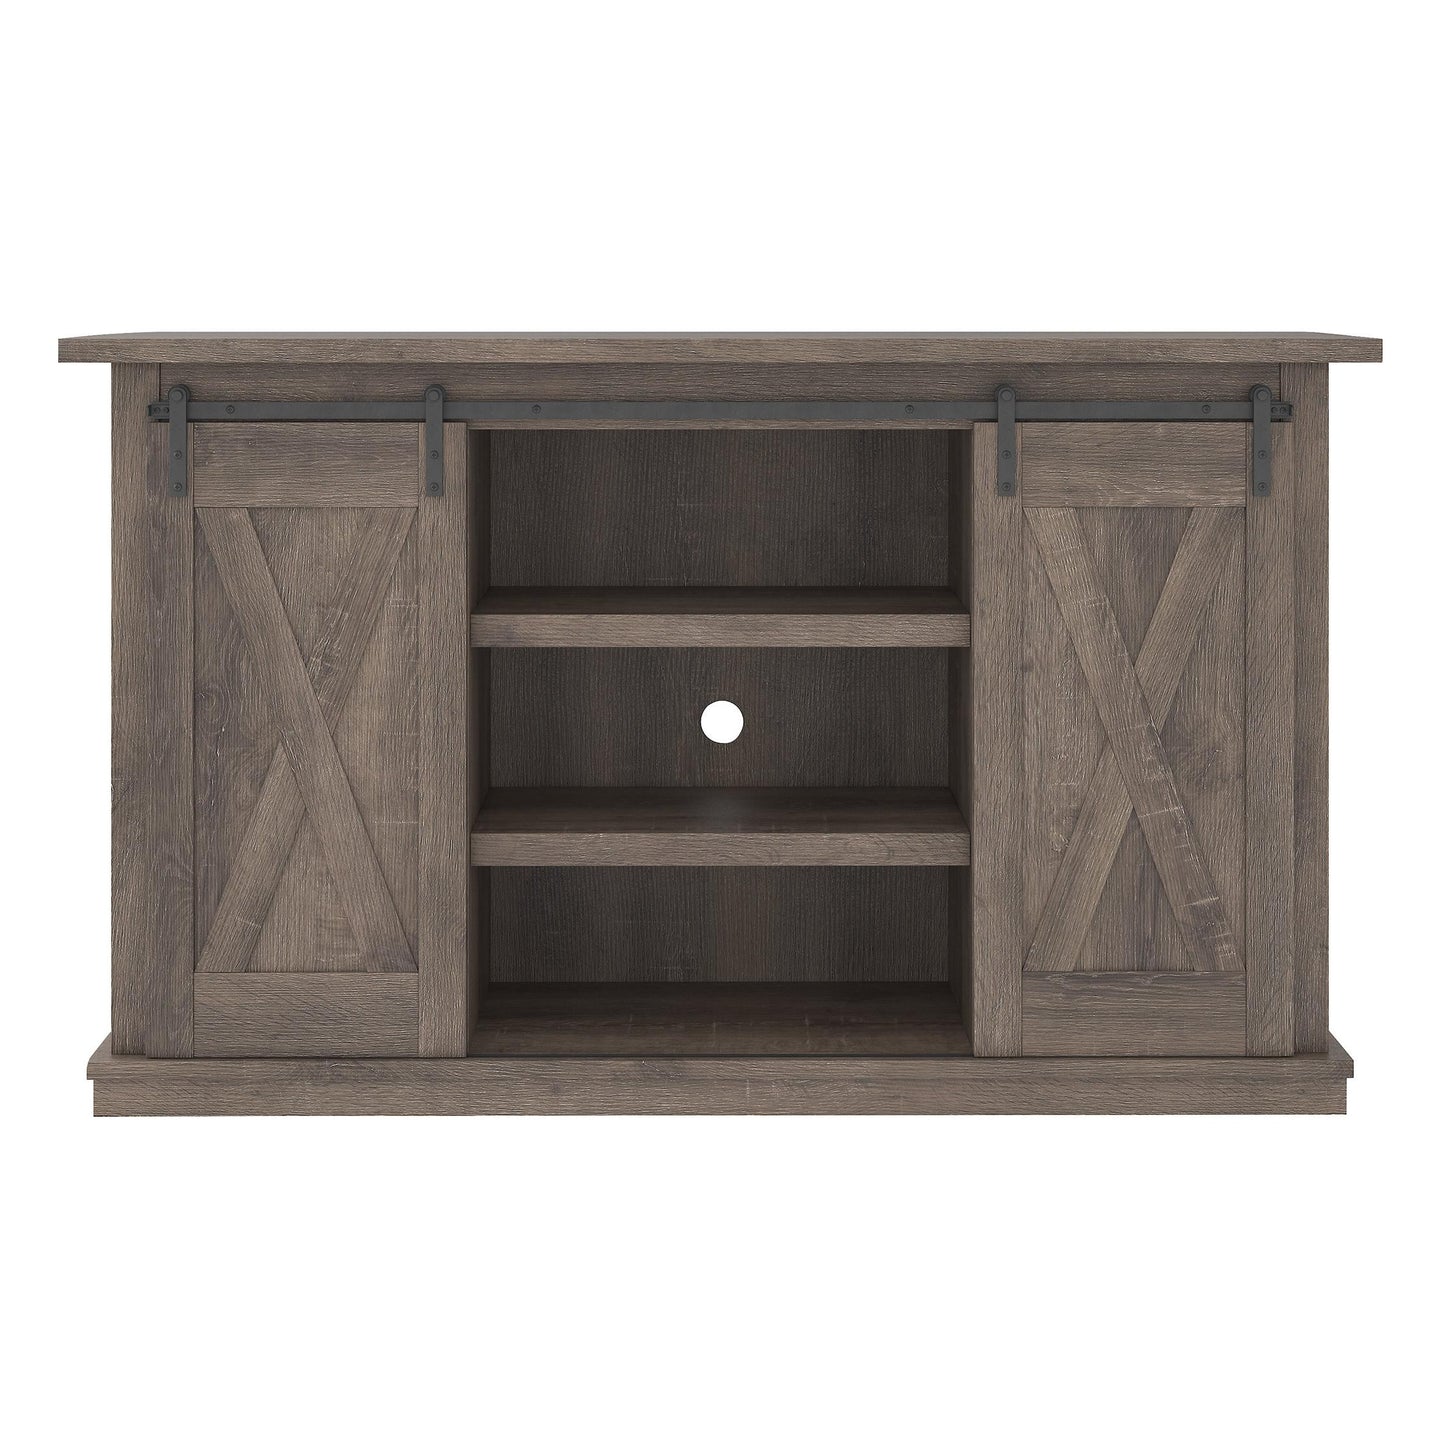 Signature Design by Ashley Arlenbry TV Stand with Cable Management W275-48 IMAGE 3